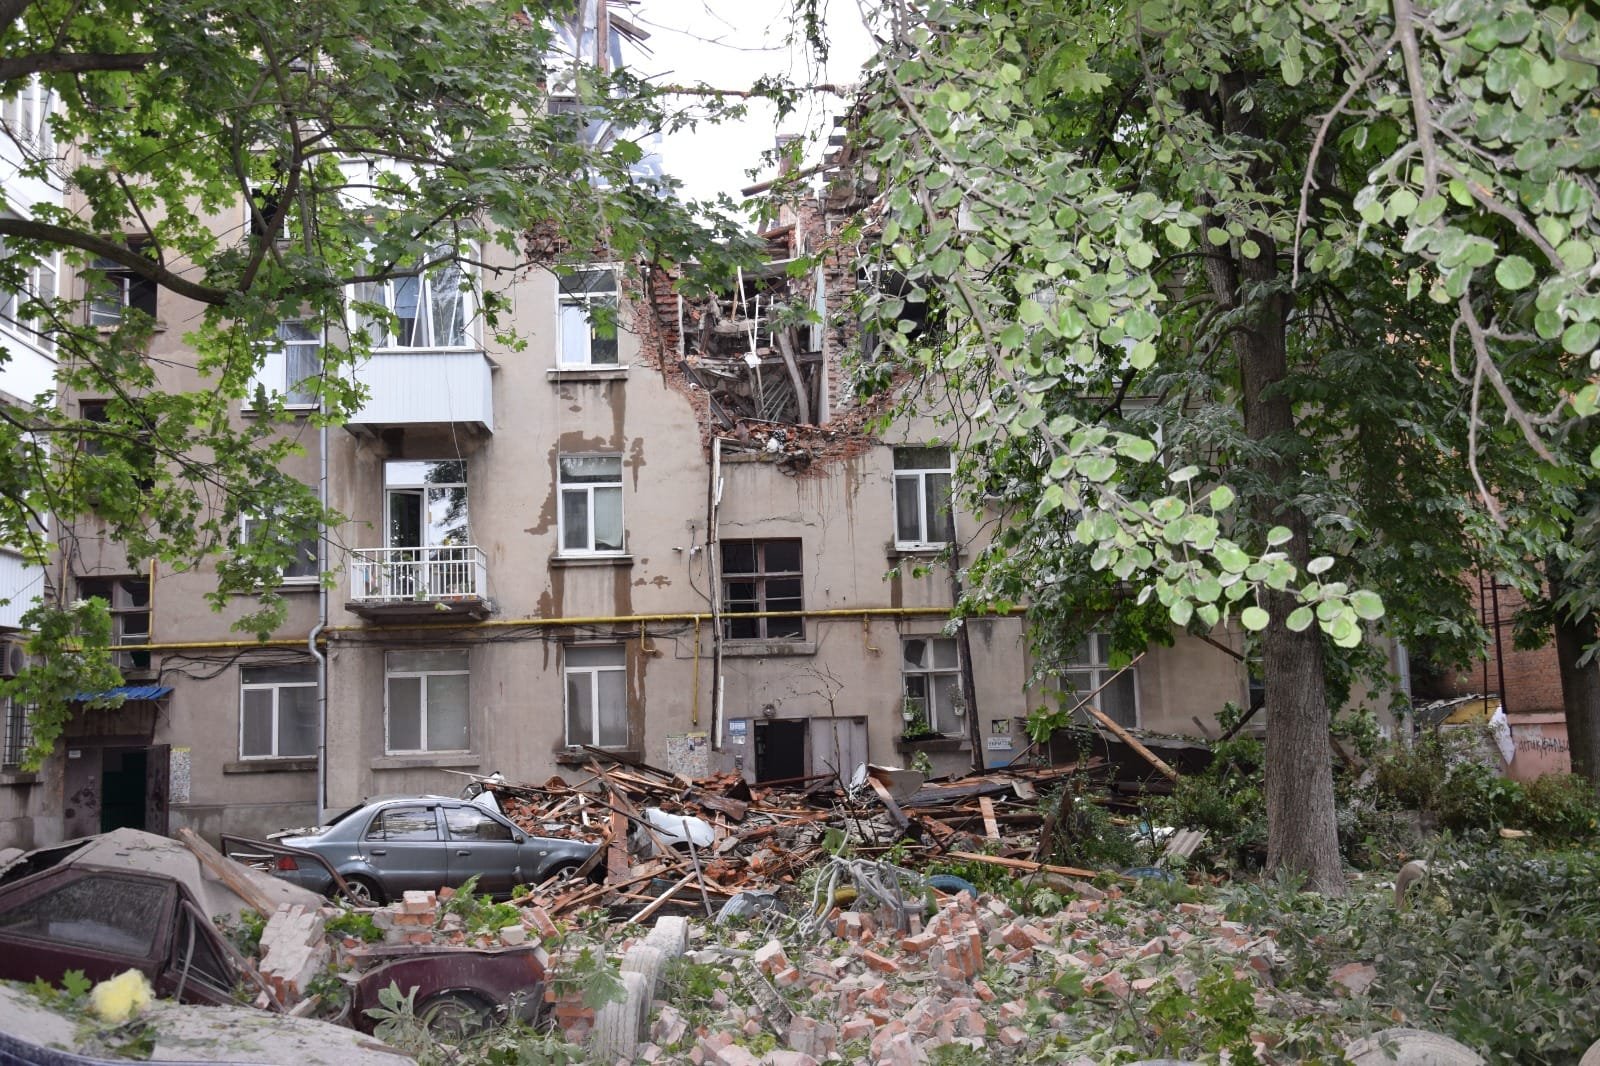 An administrative building and 2 multi-apartment residential buildings were damaged as a result of Shahed 136 drone attacks over Sumy, Ukraine, on July 3.